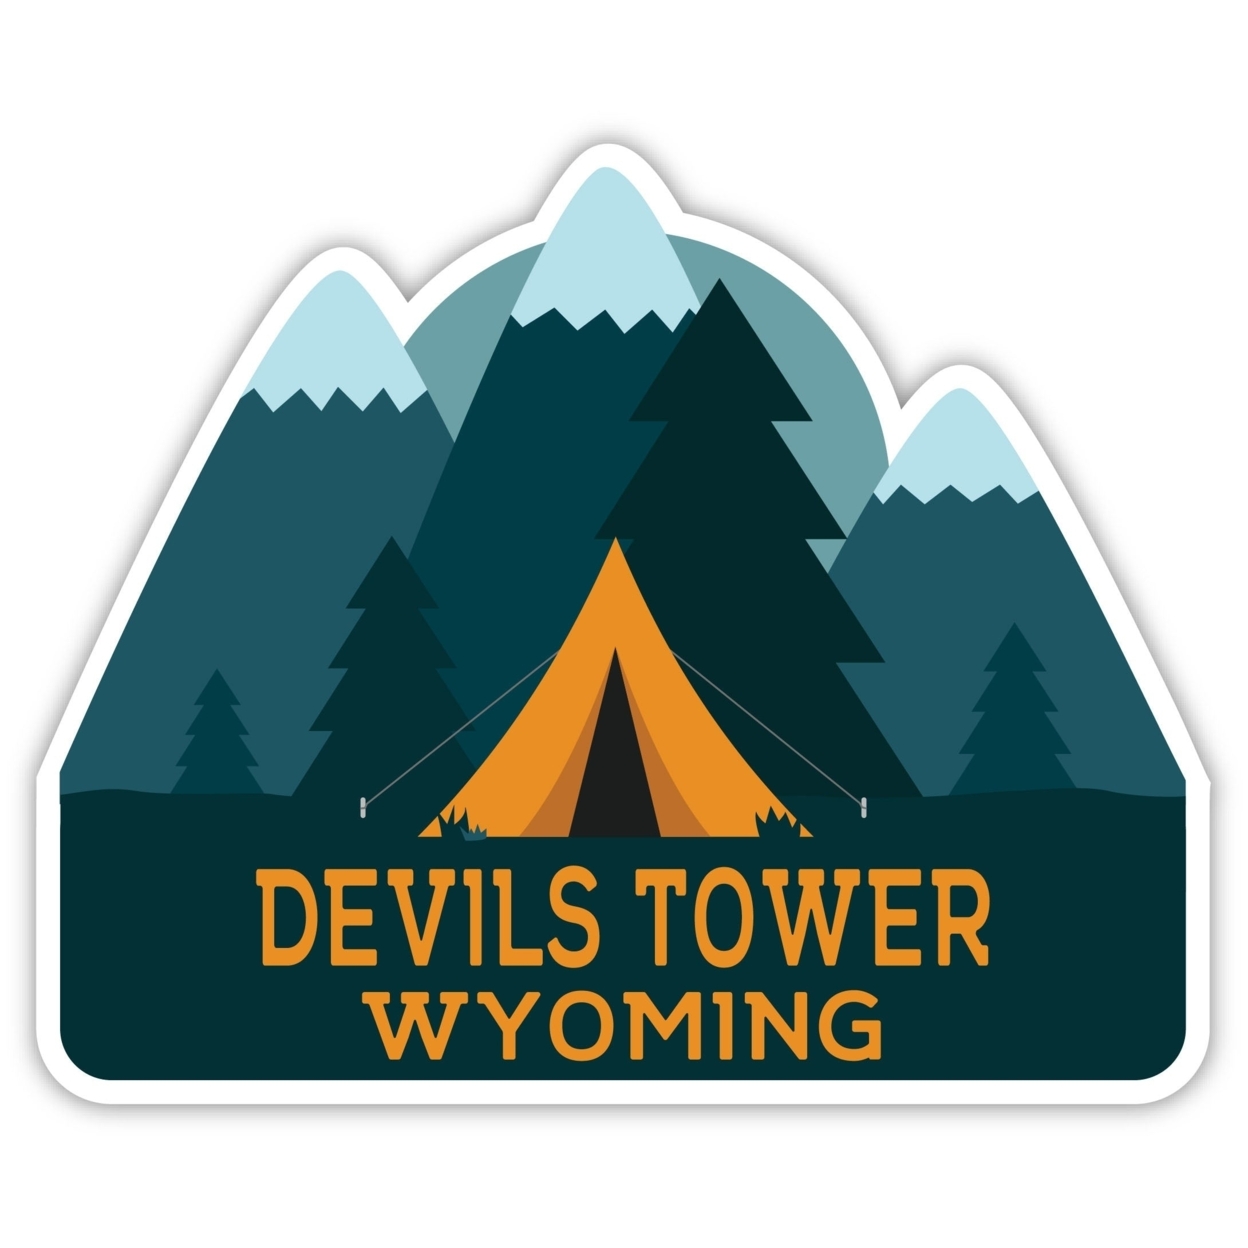 Devils Tower Wyoming Souvenir Decorative Stickers (Choose Theme And Size) - Single Unit, 2-Inch, Tent